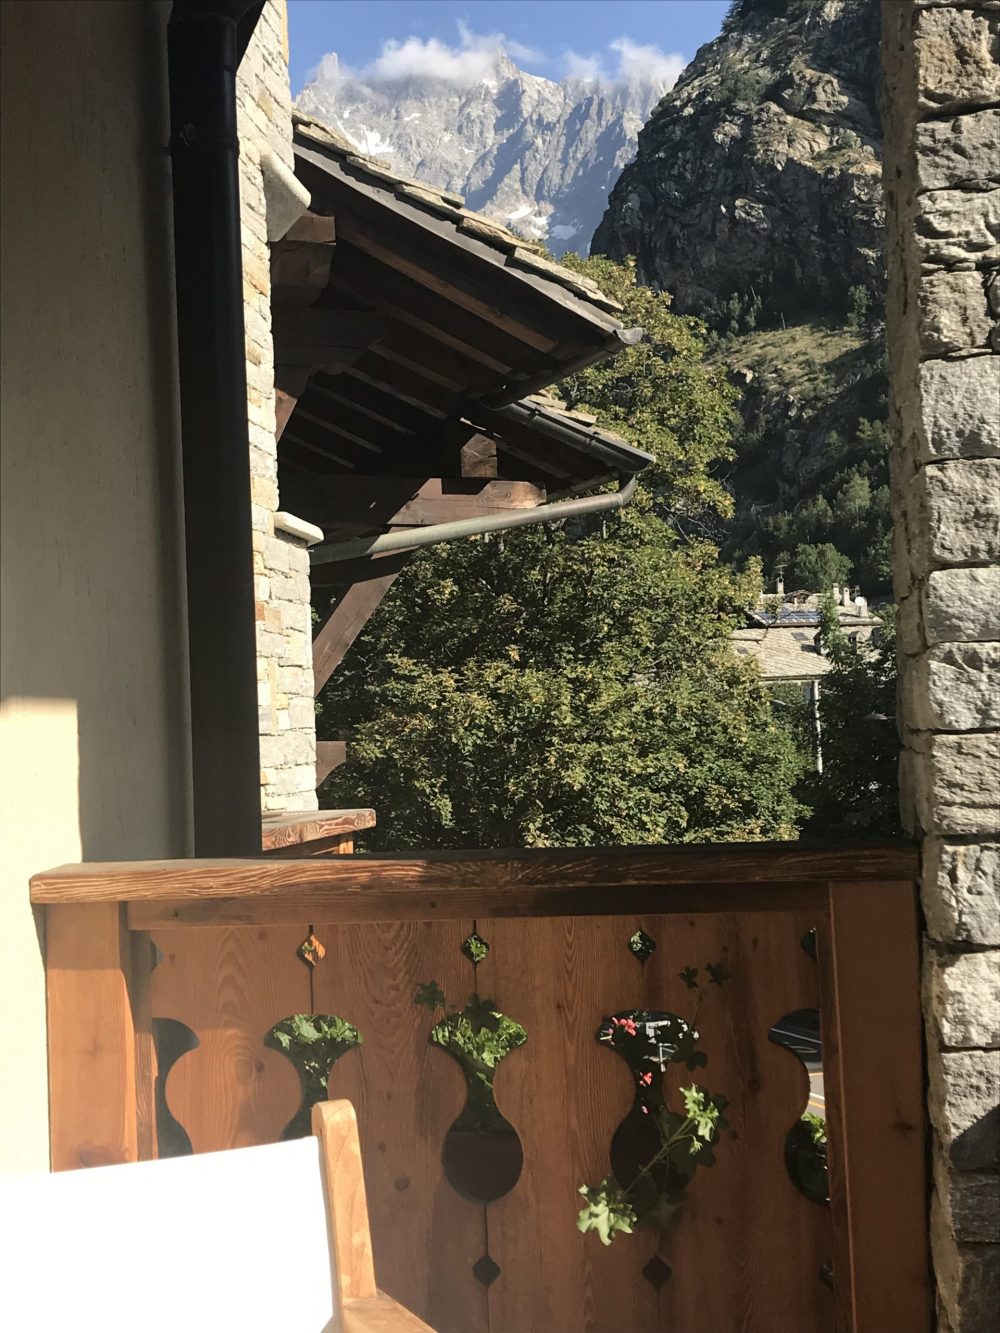 The balcony at the Gran Baita Hotel with a view of the Dente del Gigante - even though a cloud is covering it at the time. My experience of buying a home in the Italian Alps.